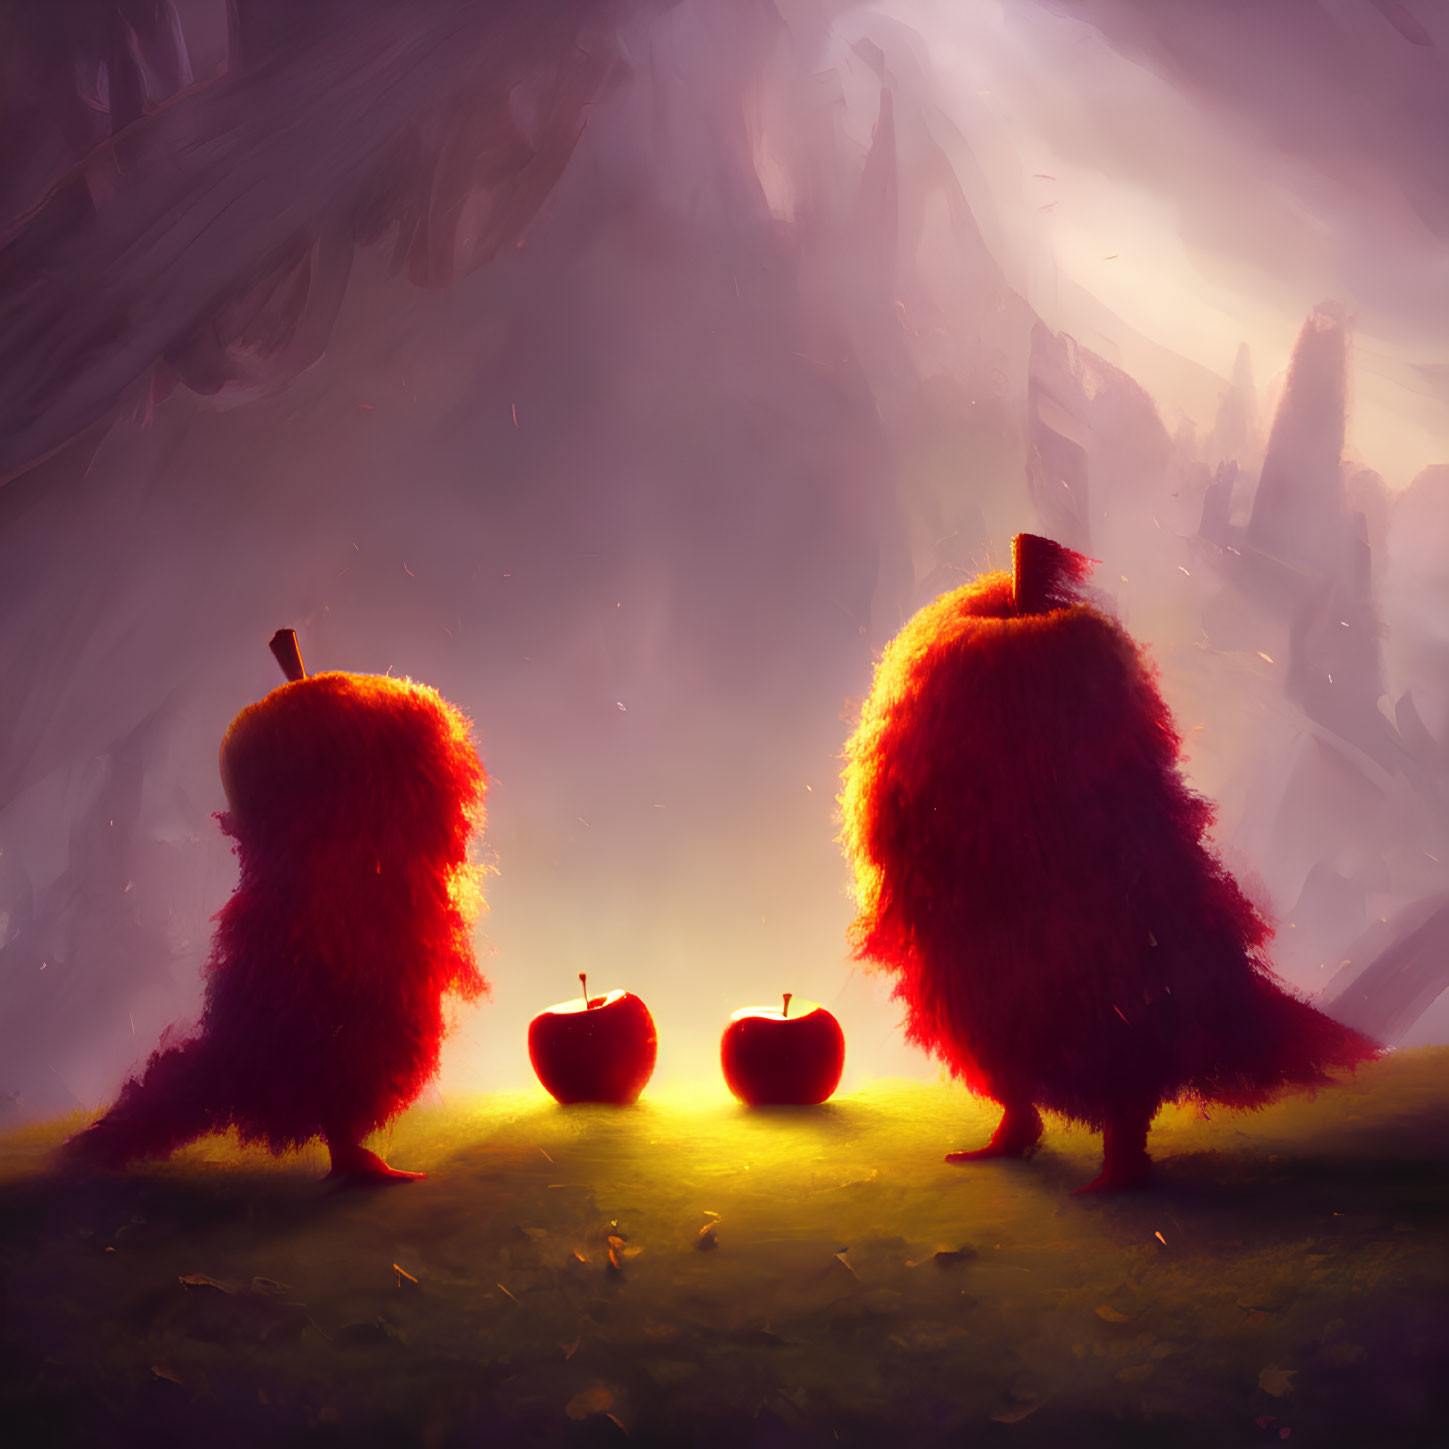 Whimsical furry creatures with glowing eyes and apples in mystical landscape